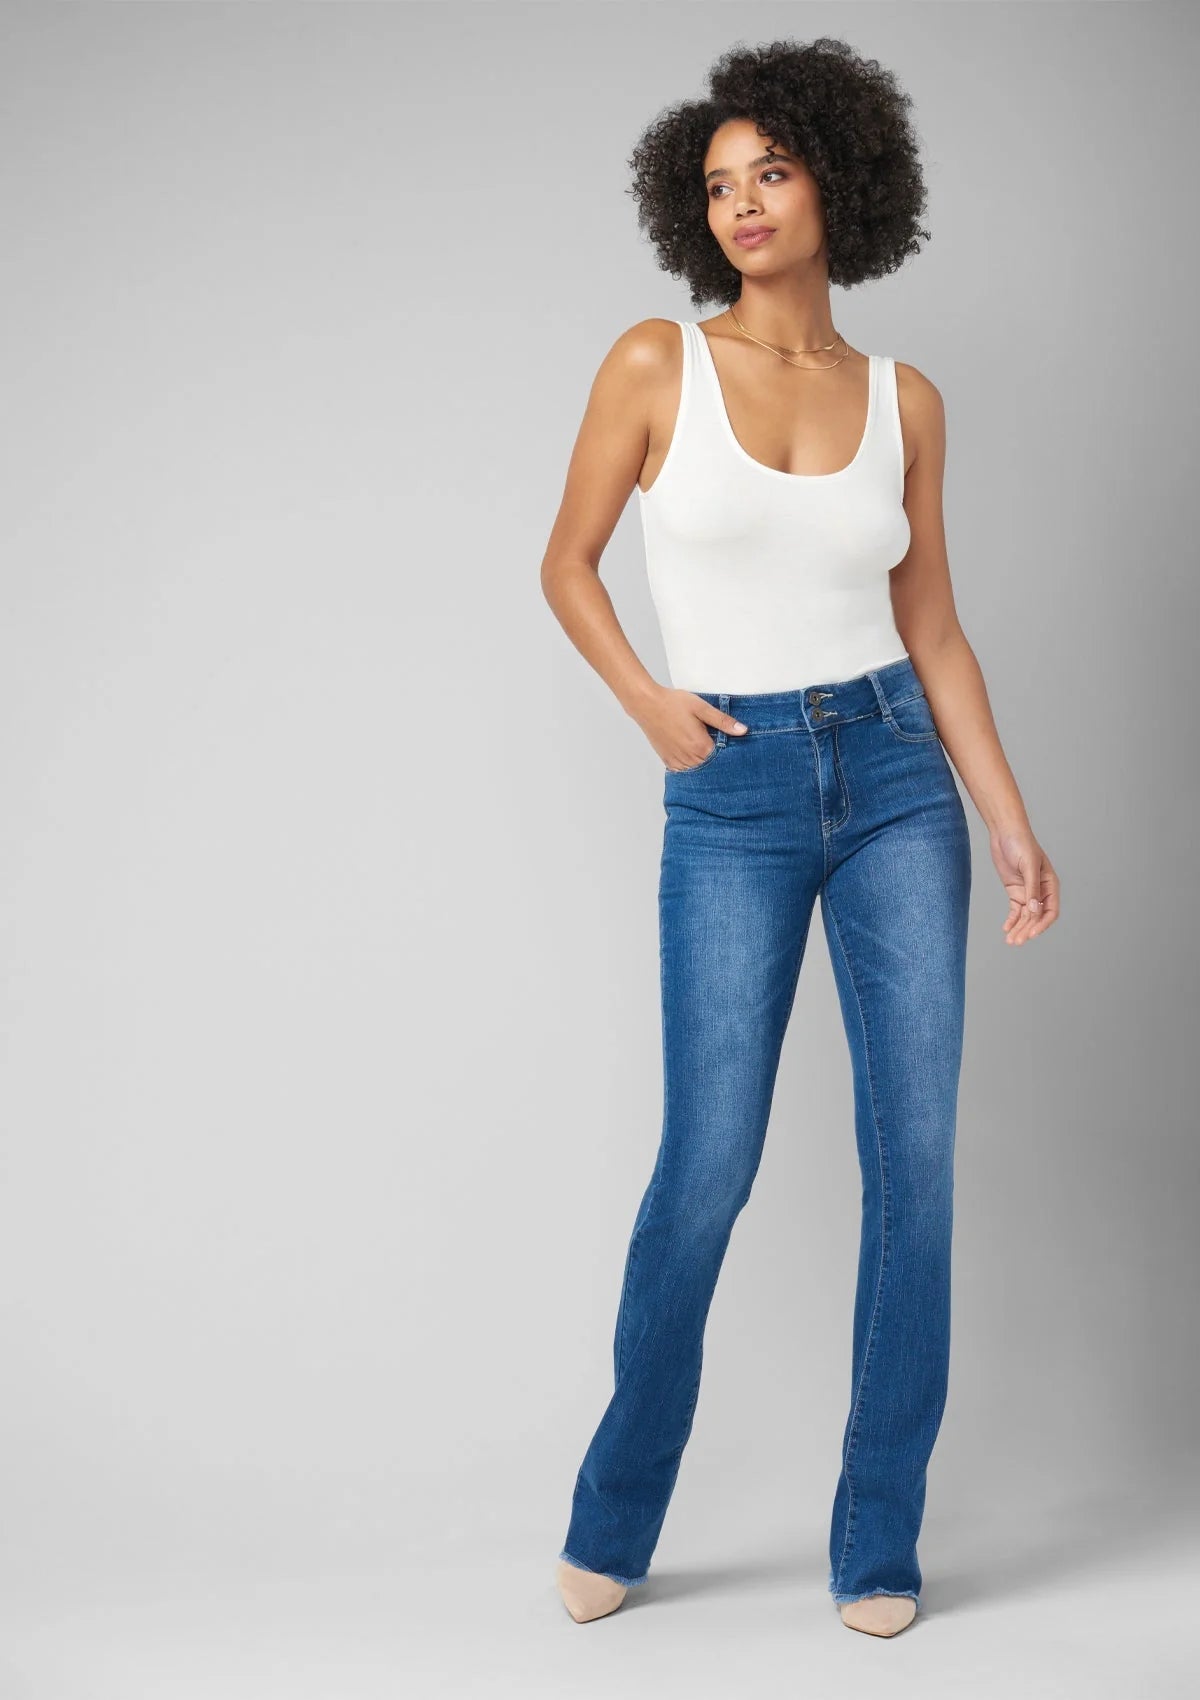 All Products | Clothing & Footwear For Women Over 5'10 | Tall Size